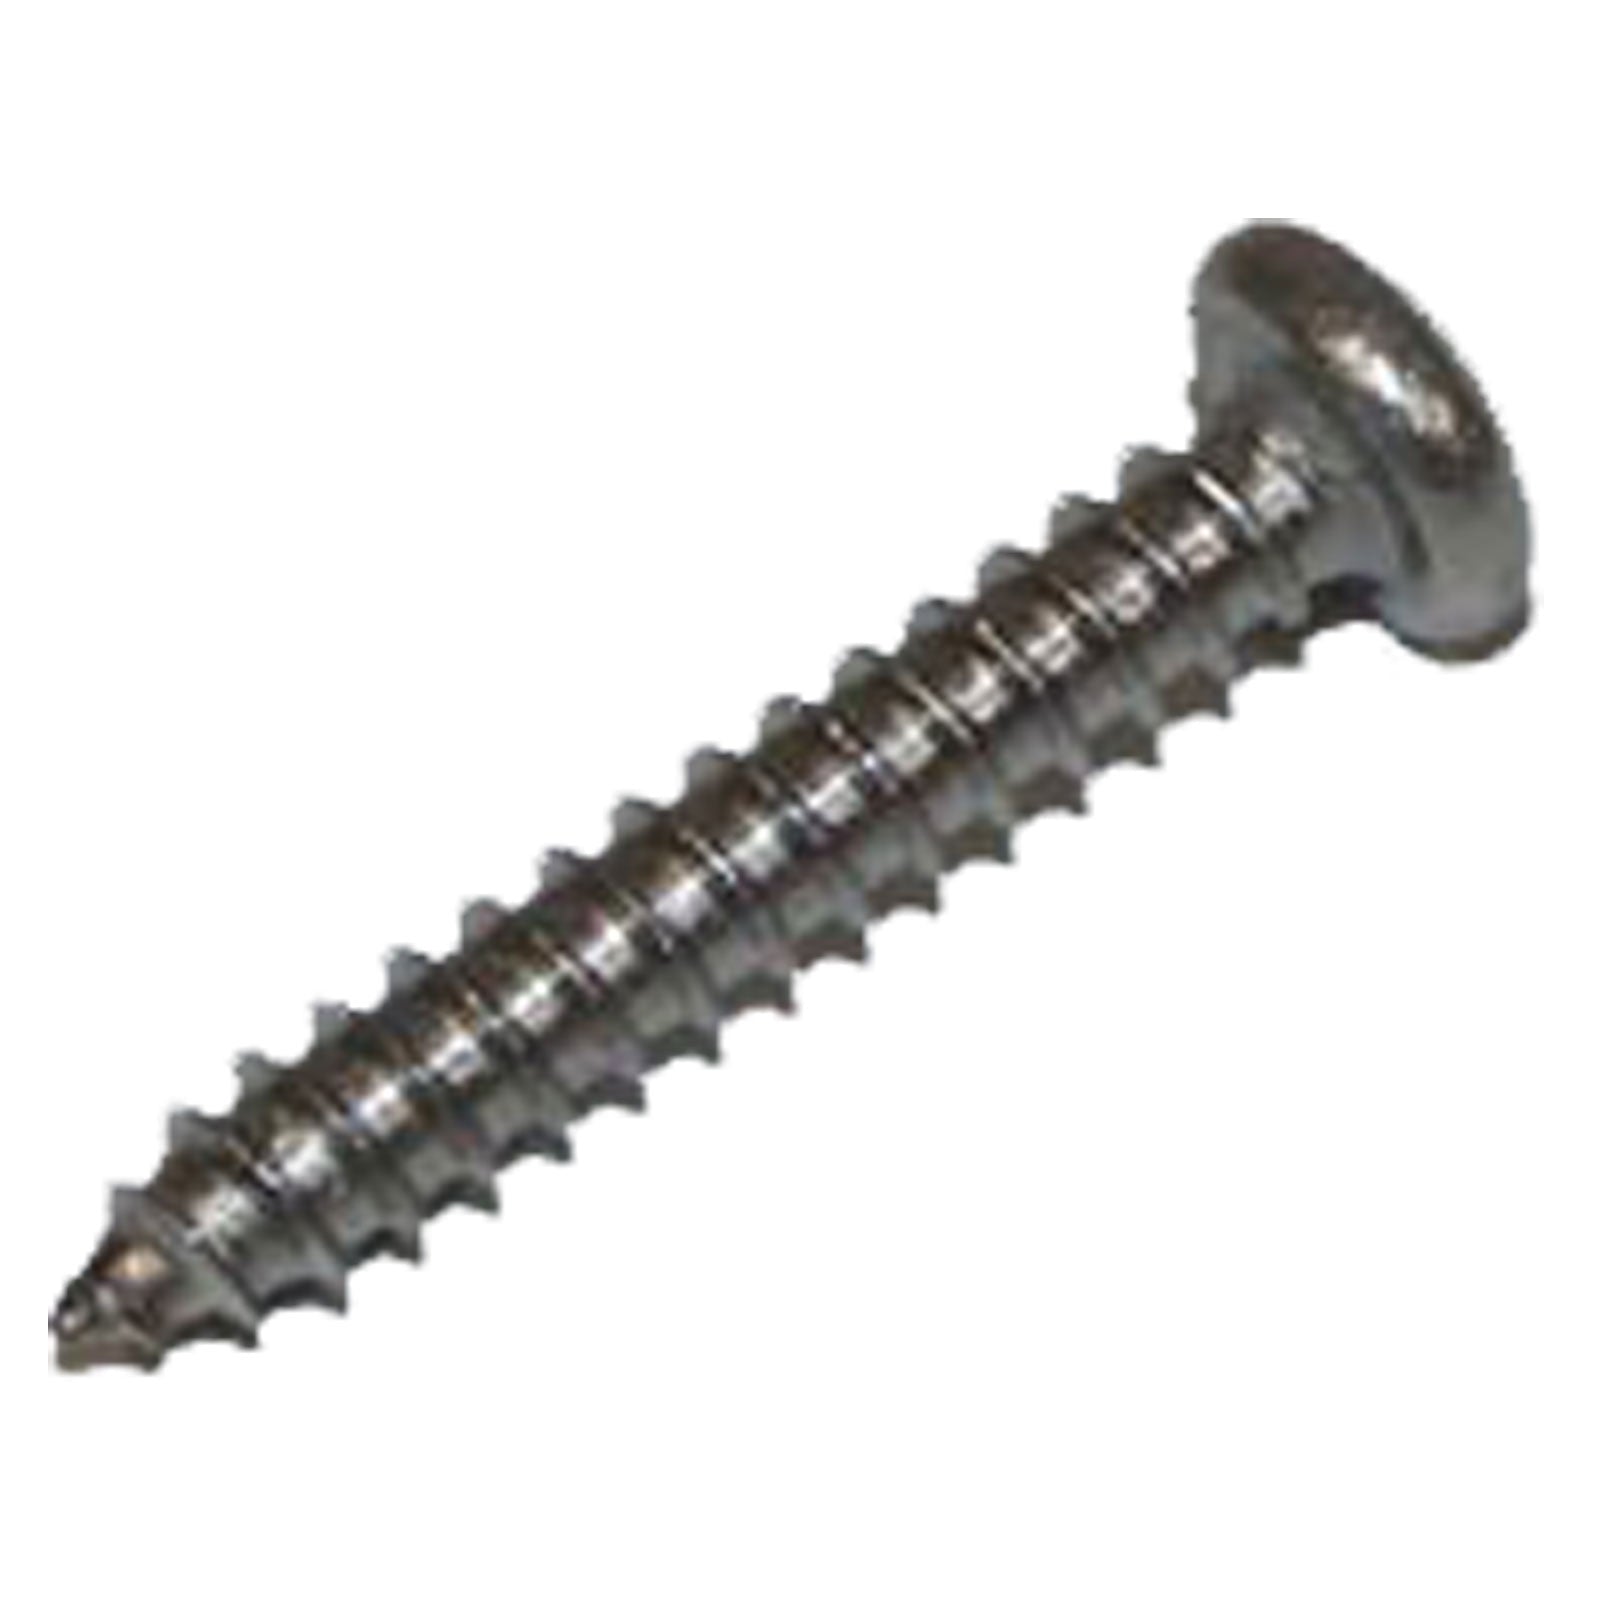 Oase Oval Head Screw CH-V2A/DIN7981 (3.5 x 22mm)